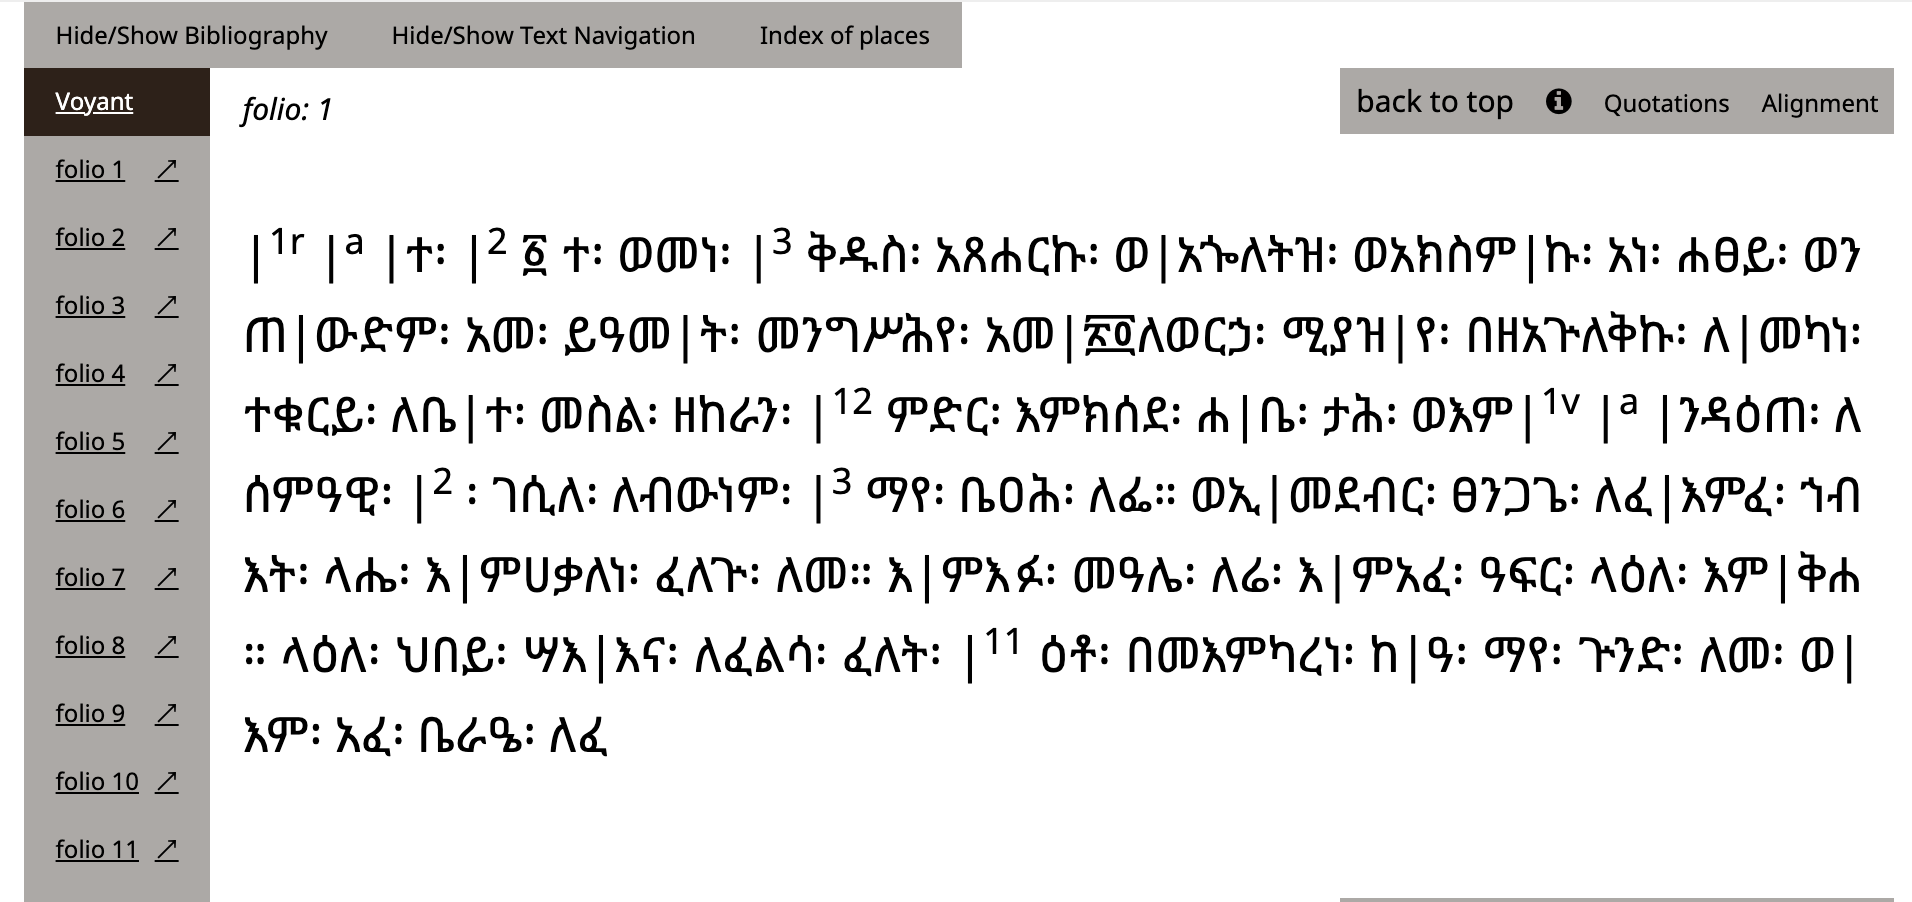 All text of the transcription of the manuscript